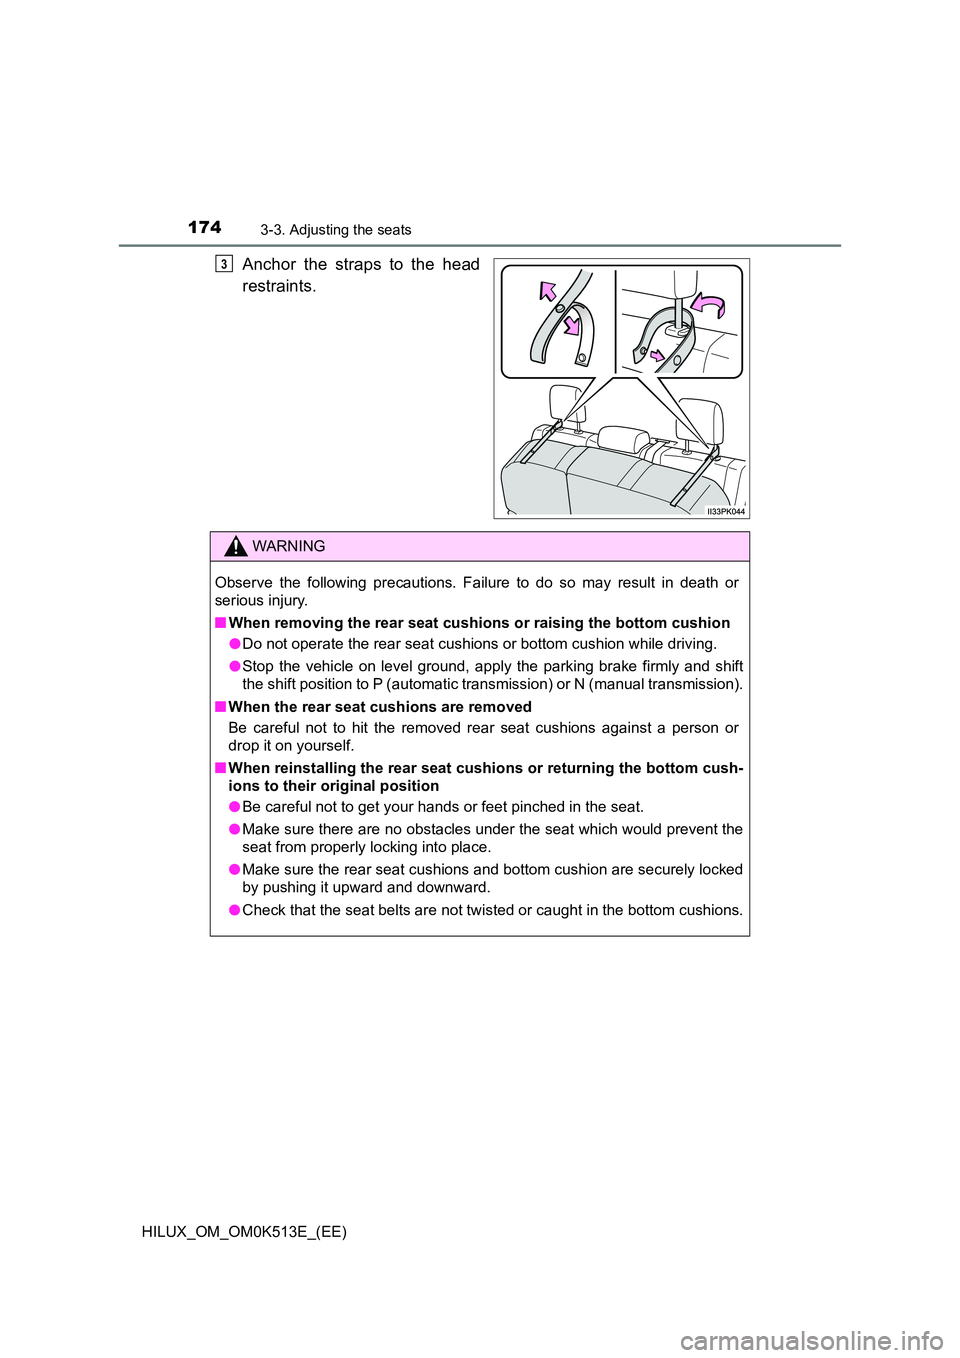 TOYOTA HILUX 2021  Owners Manual (in English) 1743-3. Adjusting the seats
HILUX_OM_OM0K513E_(EE)
Anchor the straps to the head 
restraints. 
3
WARNING
Observe the following precautions. Failure to do so may result in death or 
serious injury. 
�Q